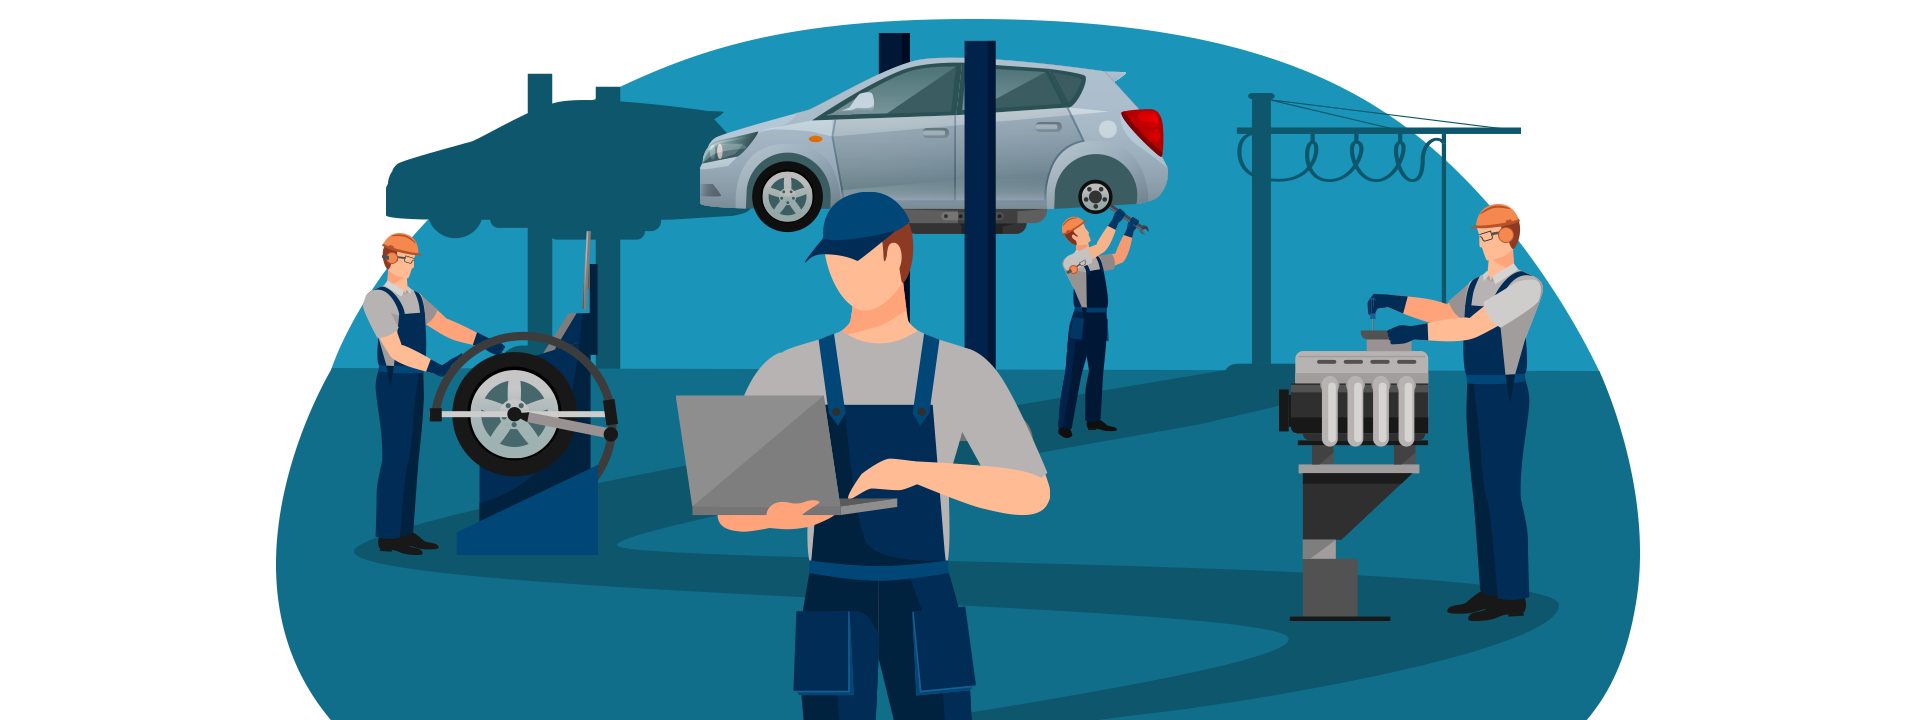 Auto Shop Safety Tips You Must Follow